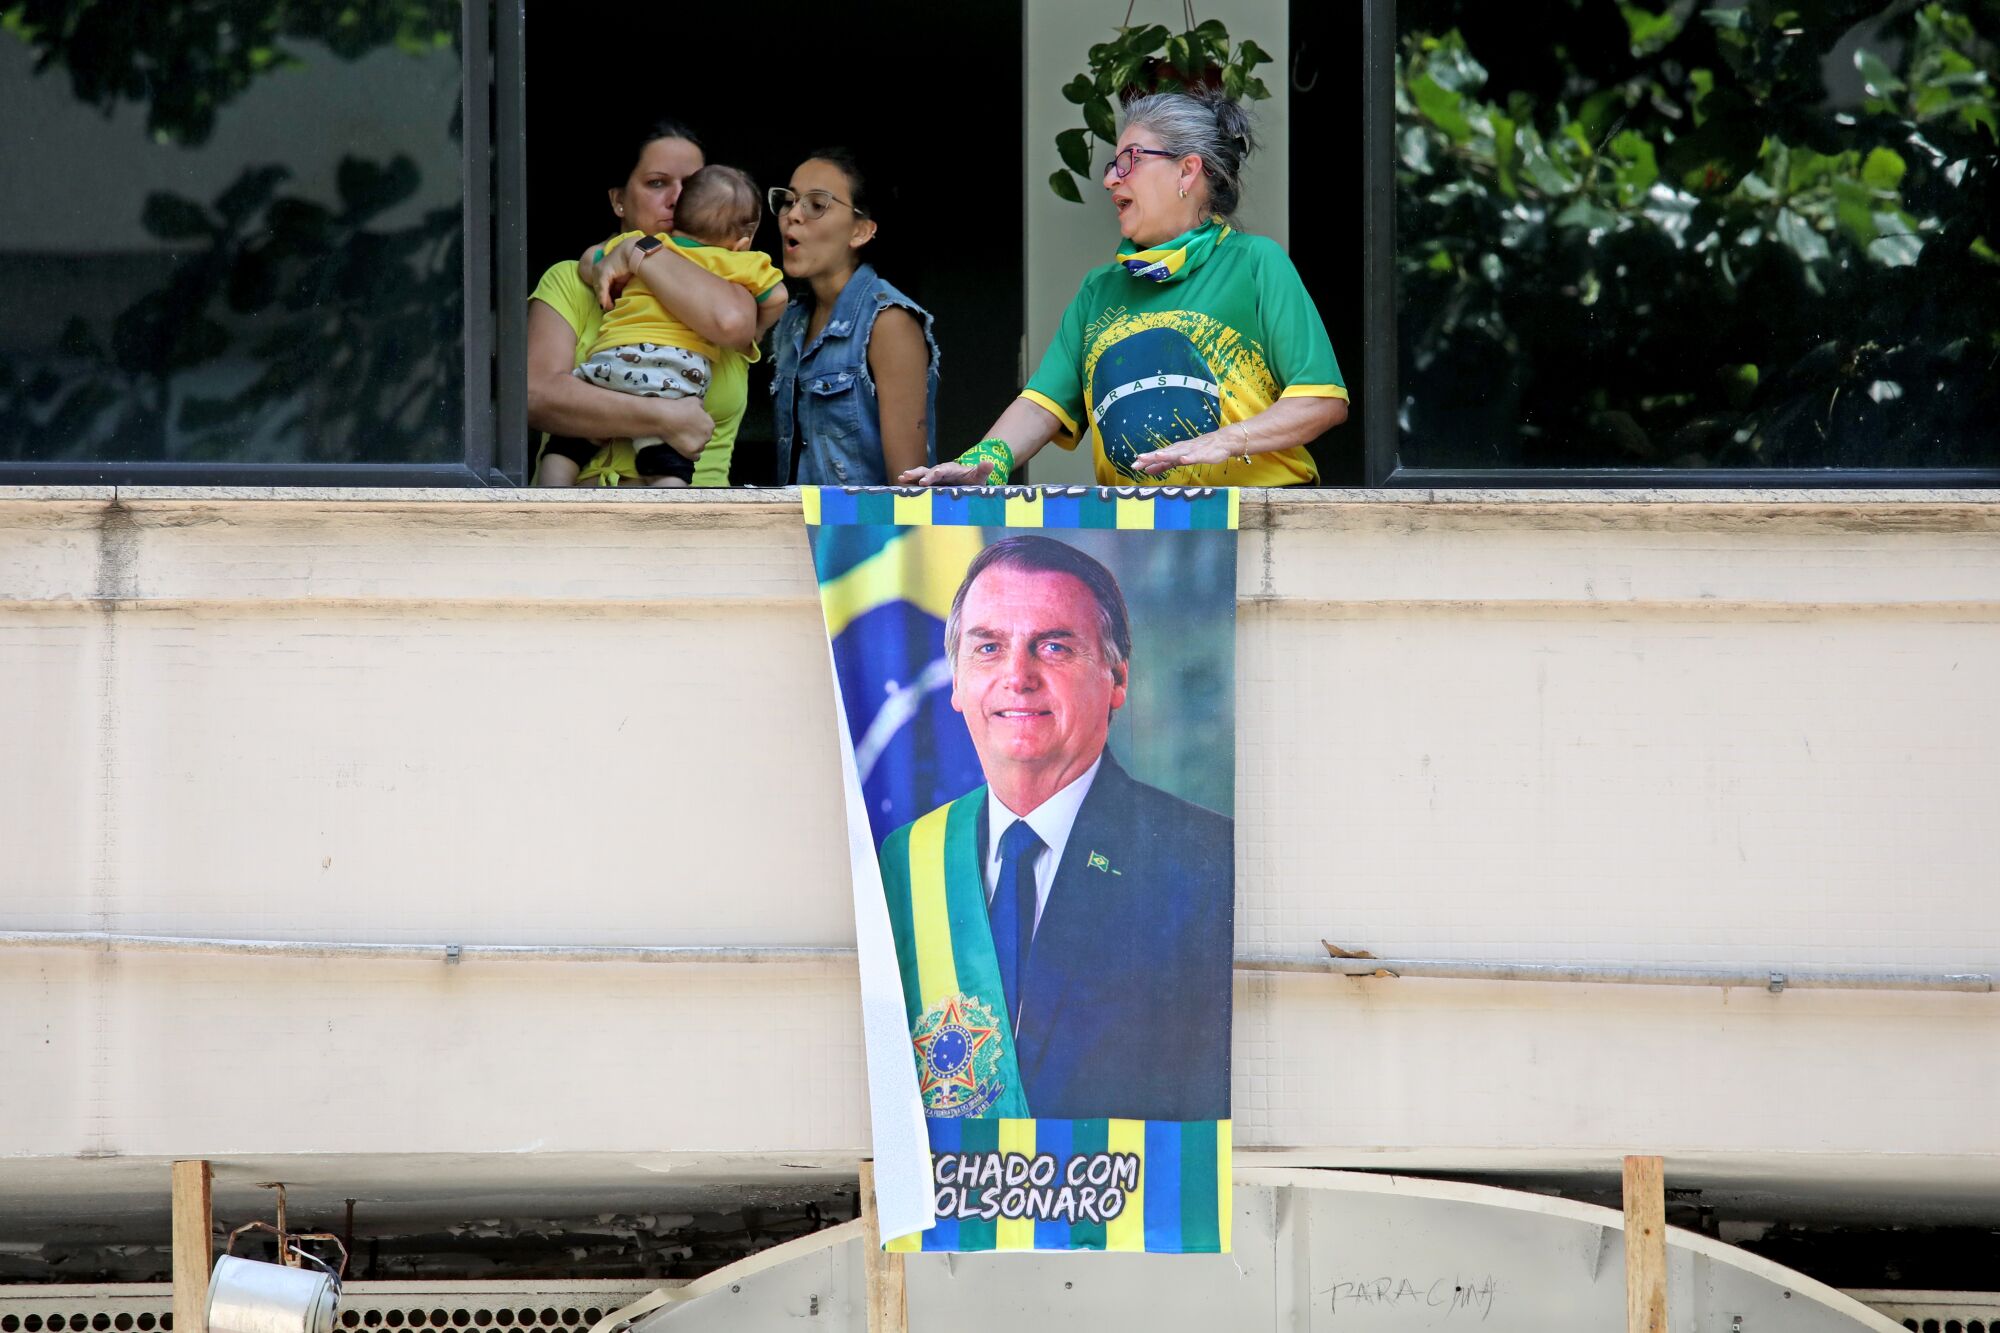 Three women, one of whom is holding a baby, stand behind a poster of a man in suit and tie wearing a green-and-yellow sash 